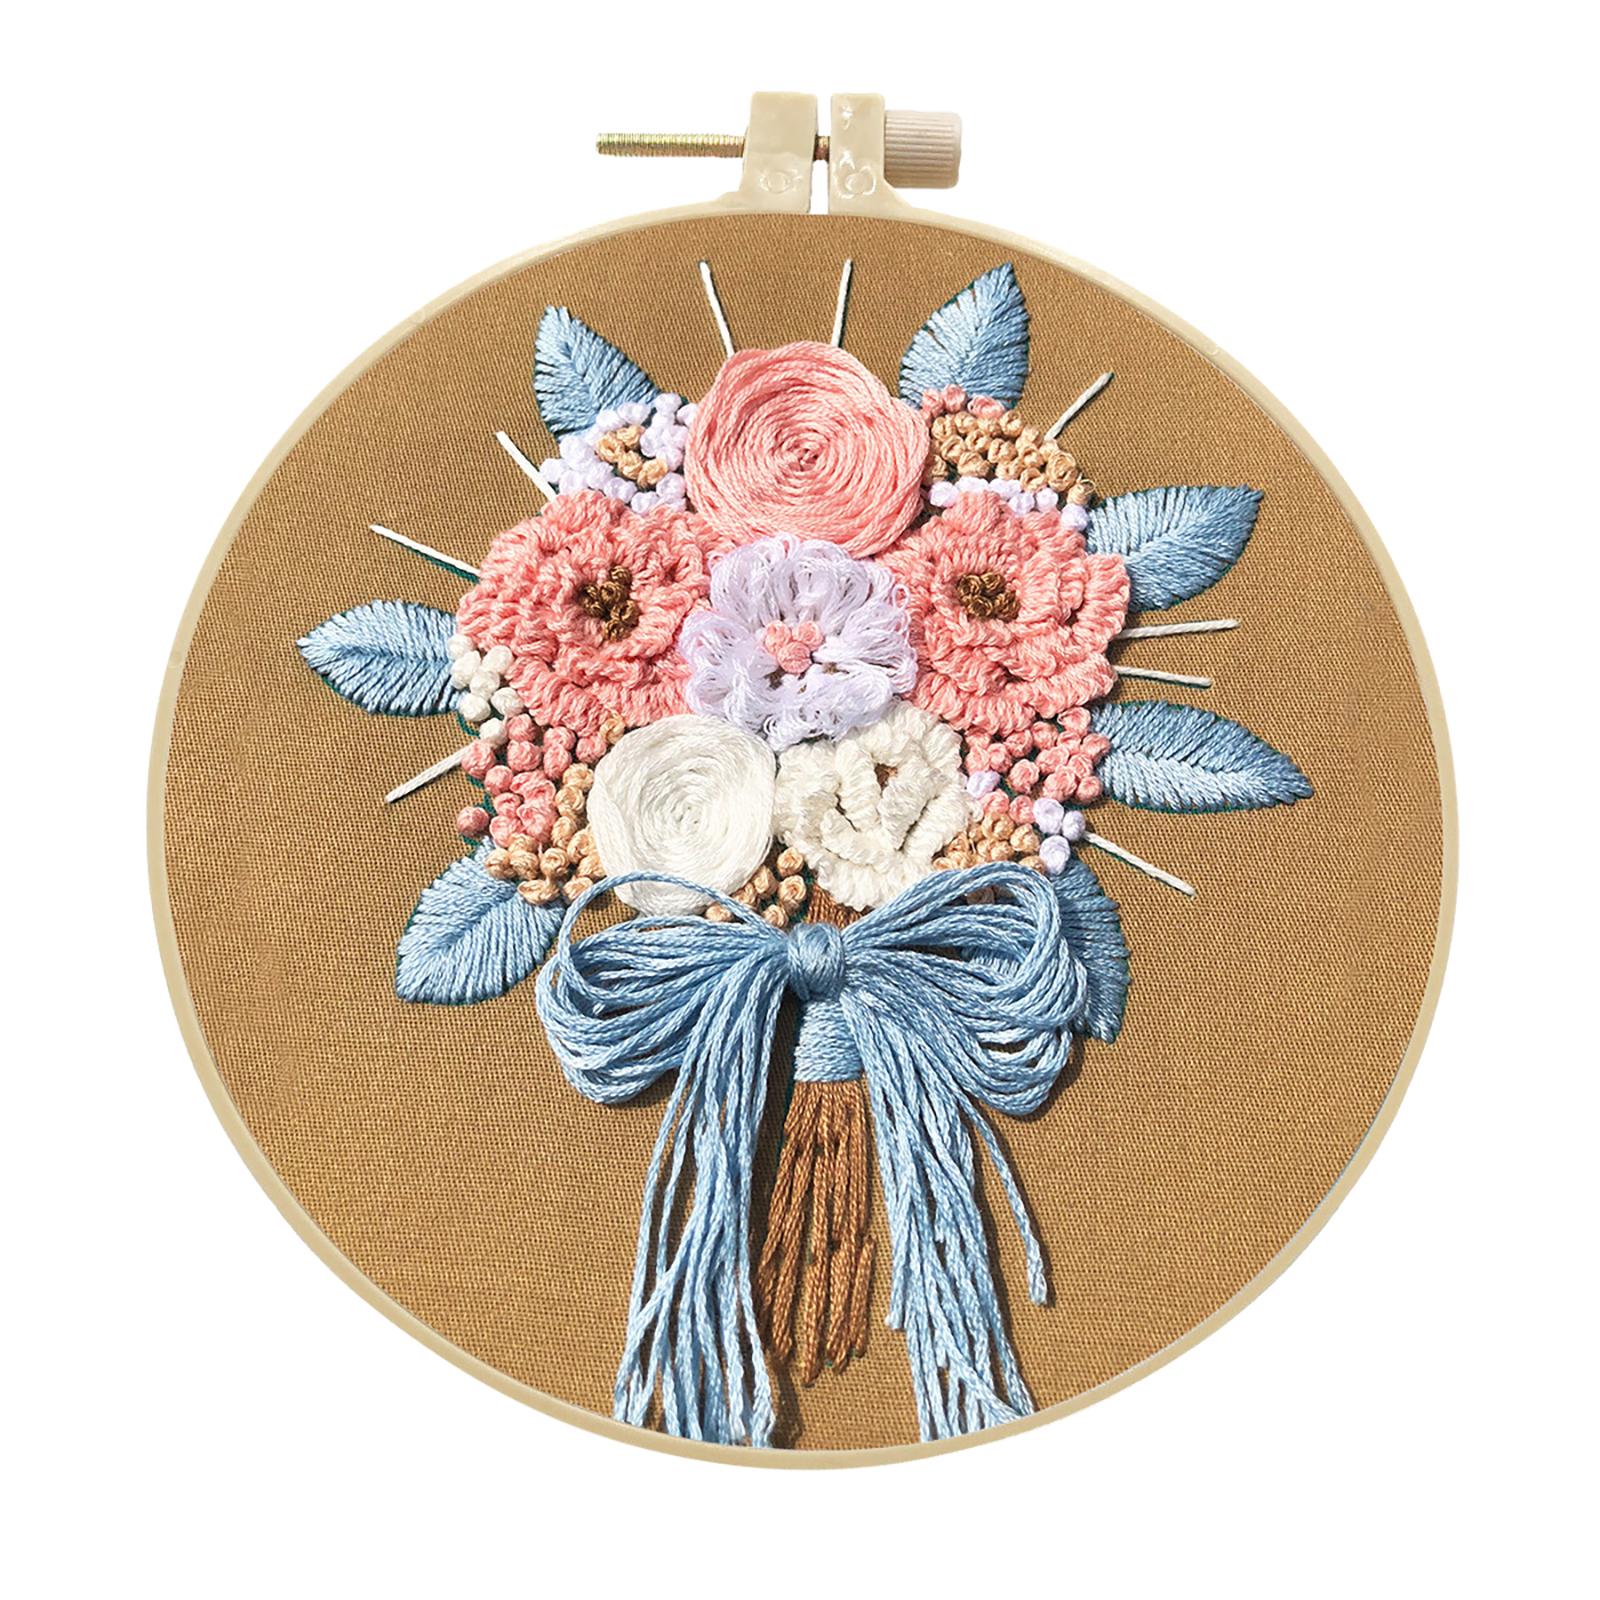 Embroidery Kits Cross stitch kits for Adult Beginner - Pink Bouquet Pattern